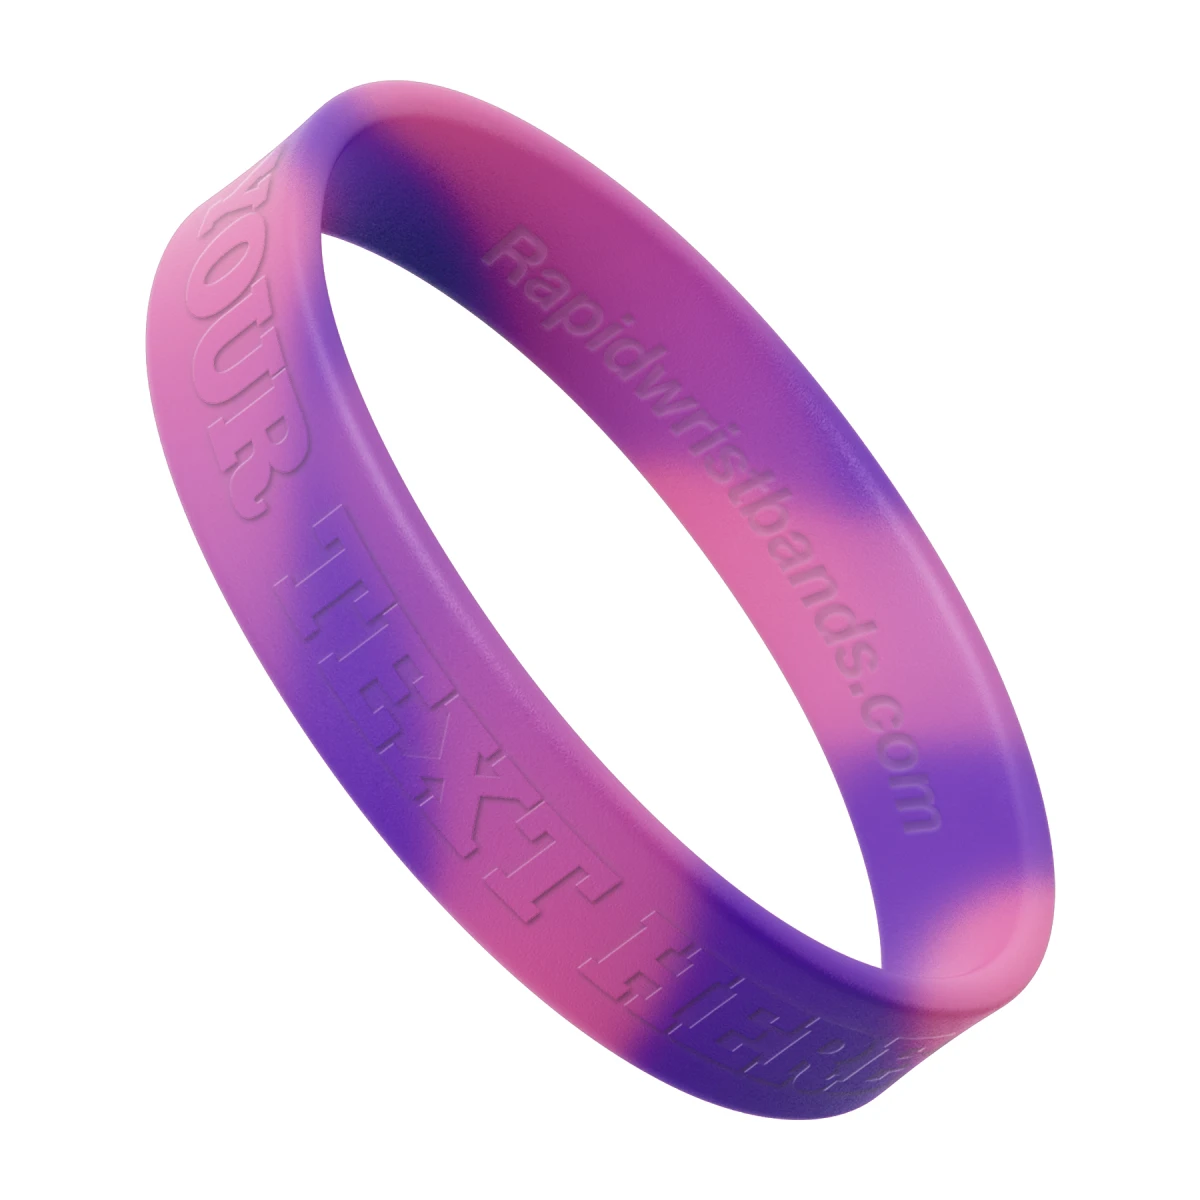 Swirl Pink/Purple Wristband With Your Text Here Embossed